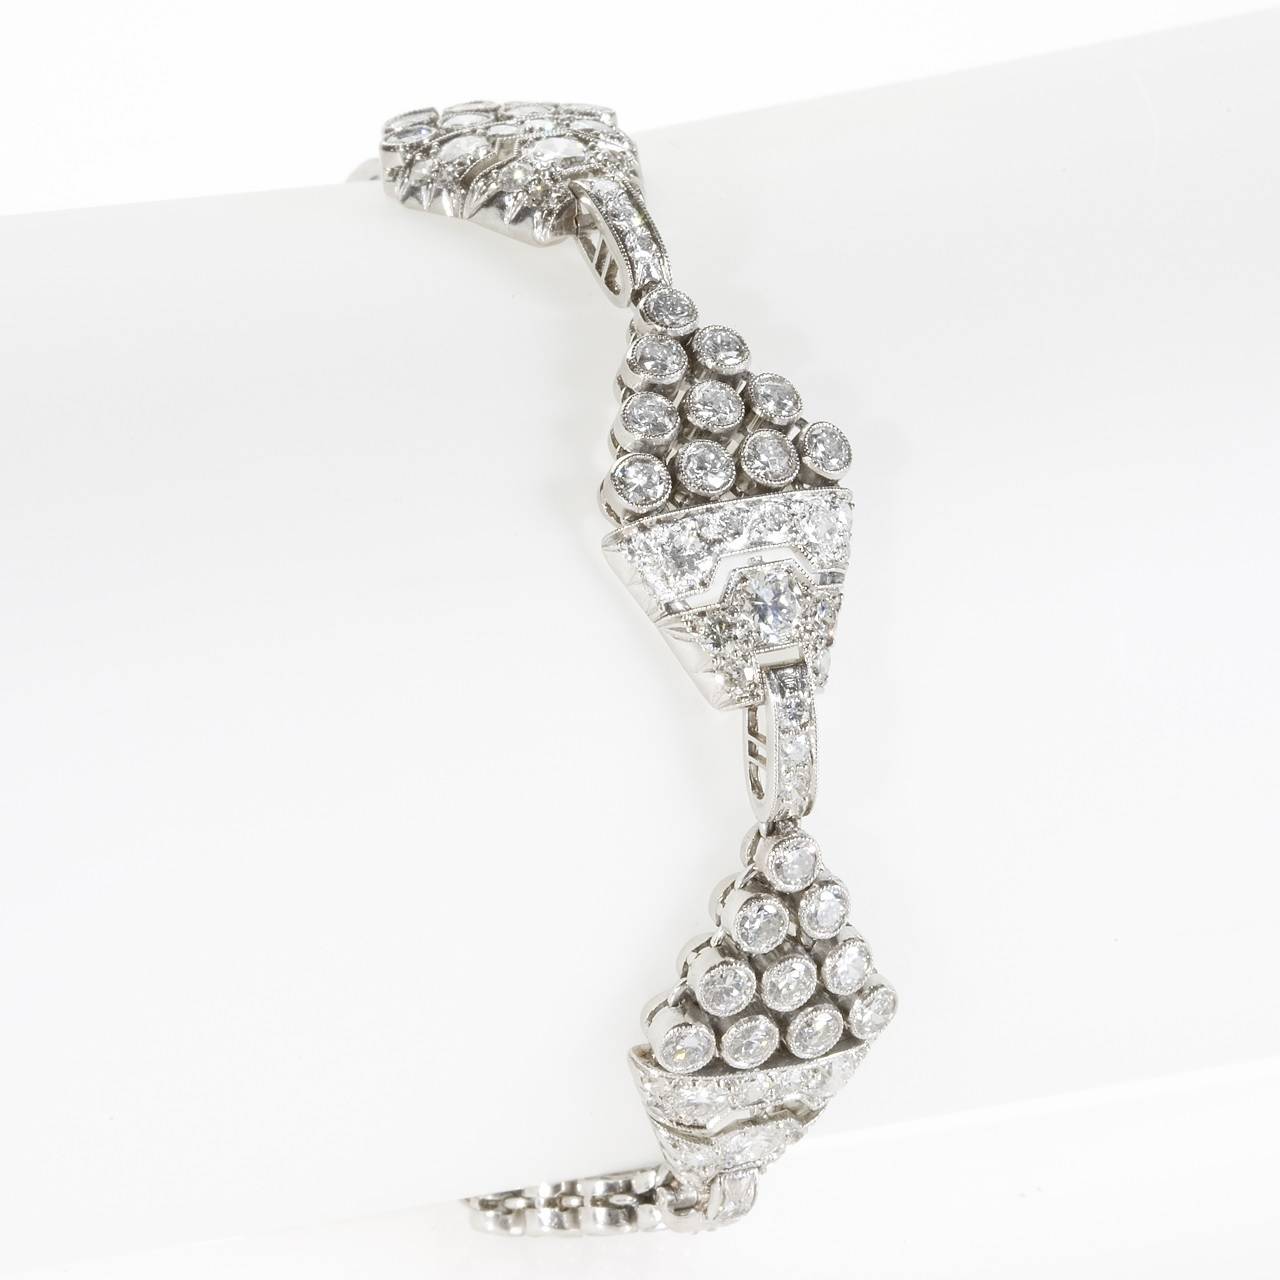 An Art Deco platinum and diamond bracelet.  The bracelet is set with old European-cut diamonds with an approximate total weight of 9.35 carats. The bracelet is composed of 6 diamond-set plaques separated by diamond-set links. Circa 1920's. 


(MG